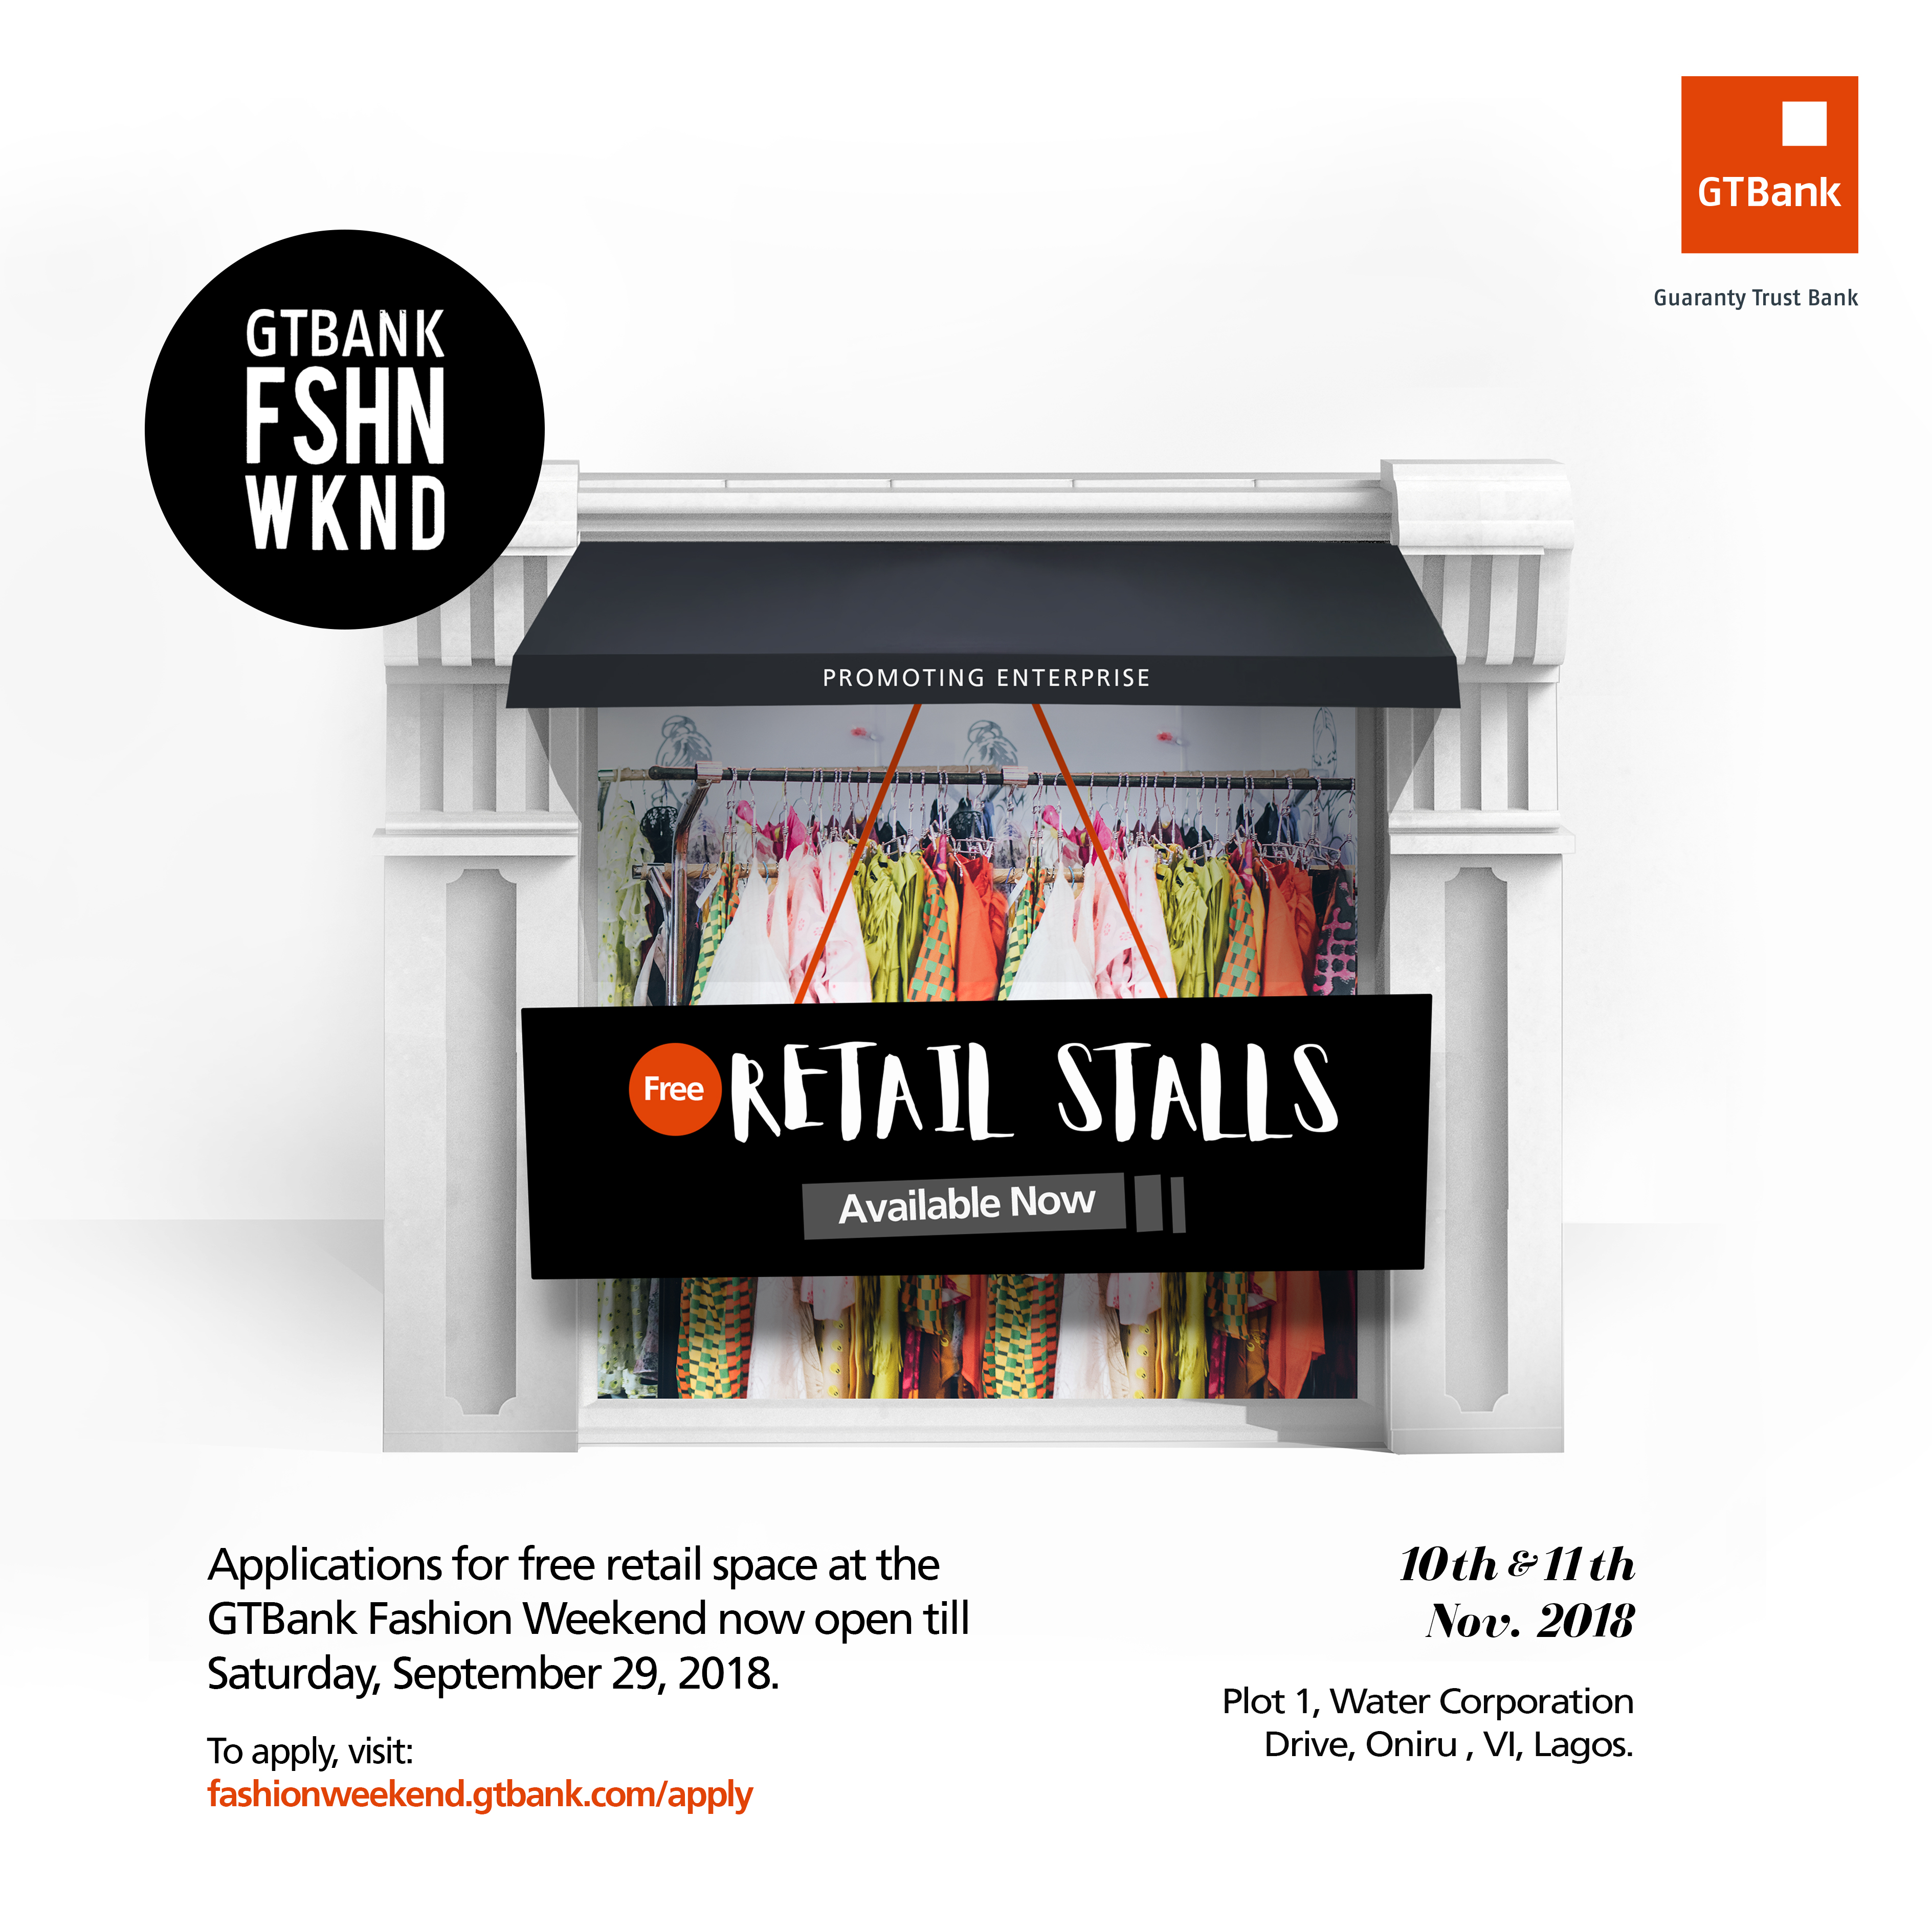 You can now apply for a free retail stall at the 2018 GTbank Fashion Weekend